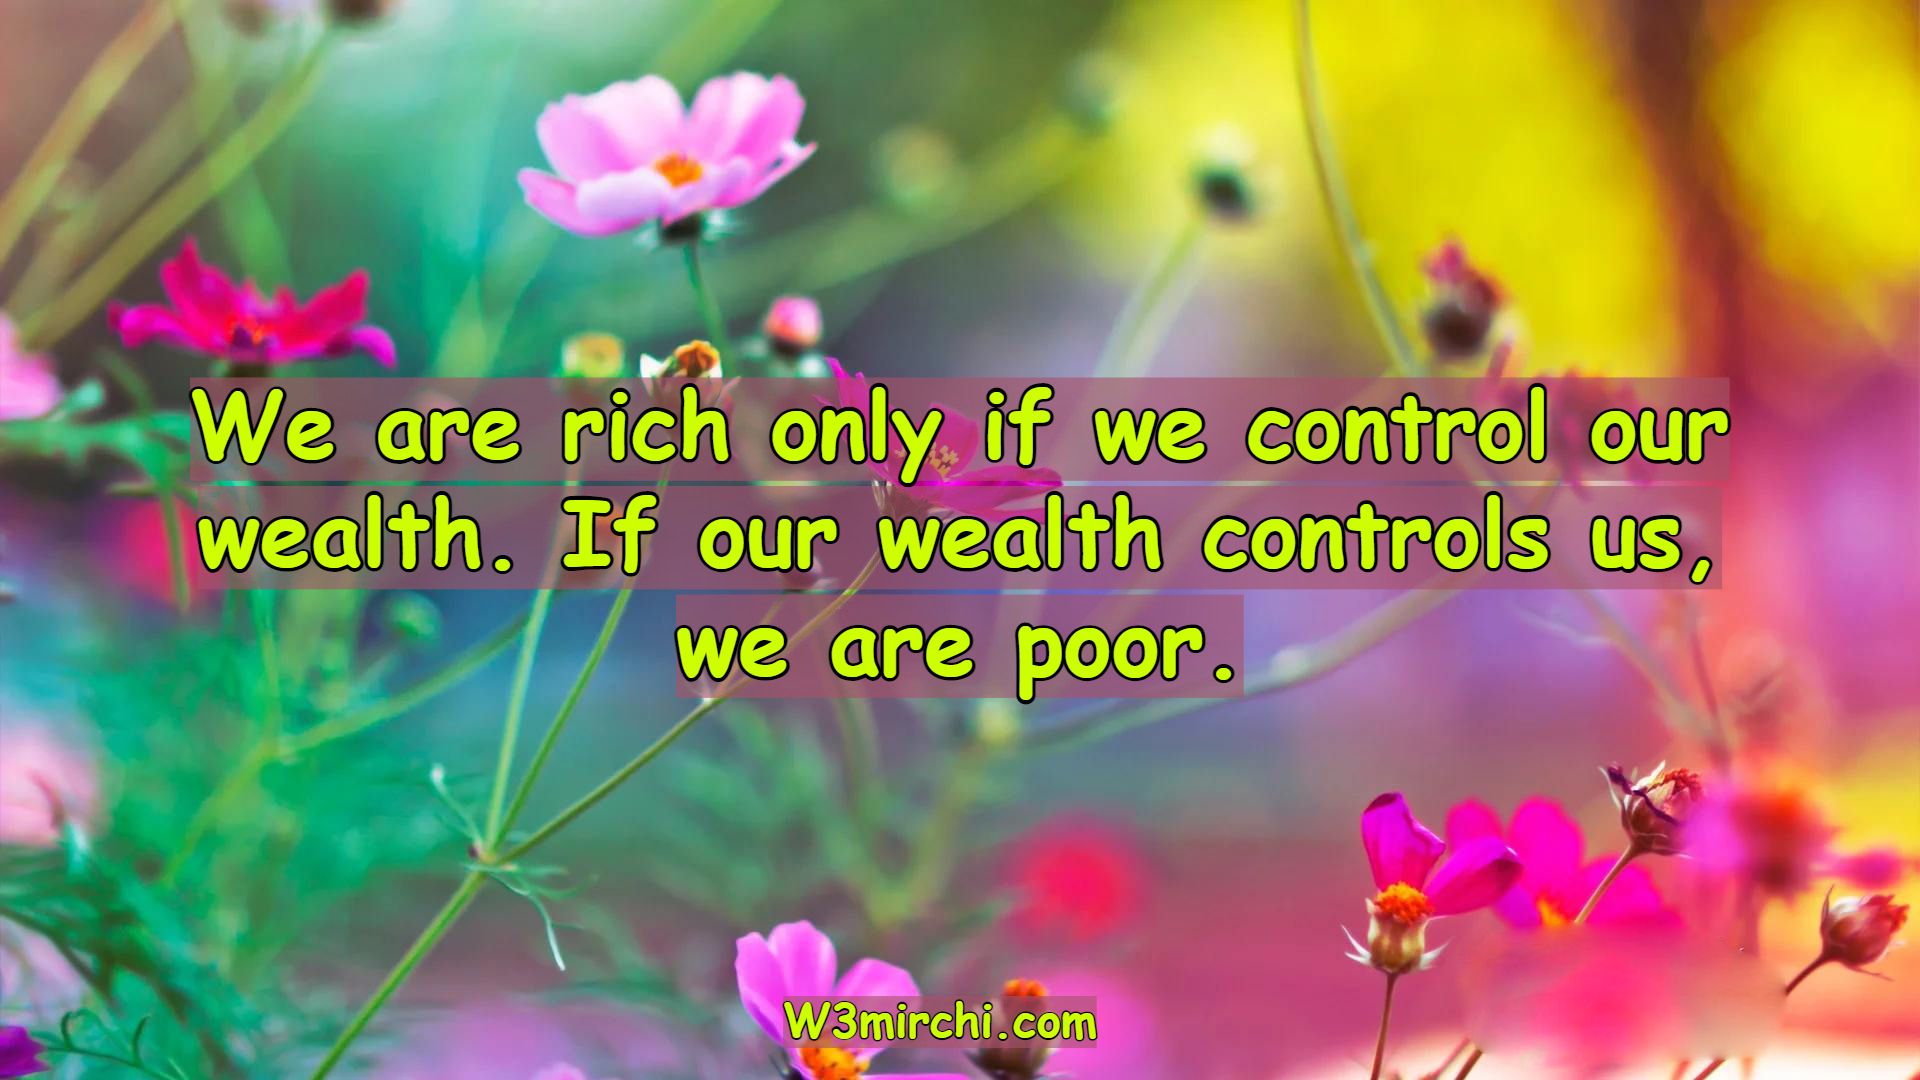 We are rich only if we control our wealth.